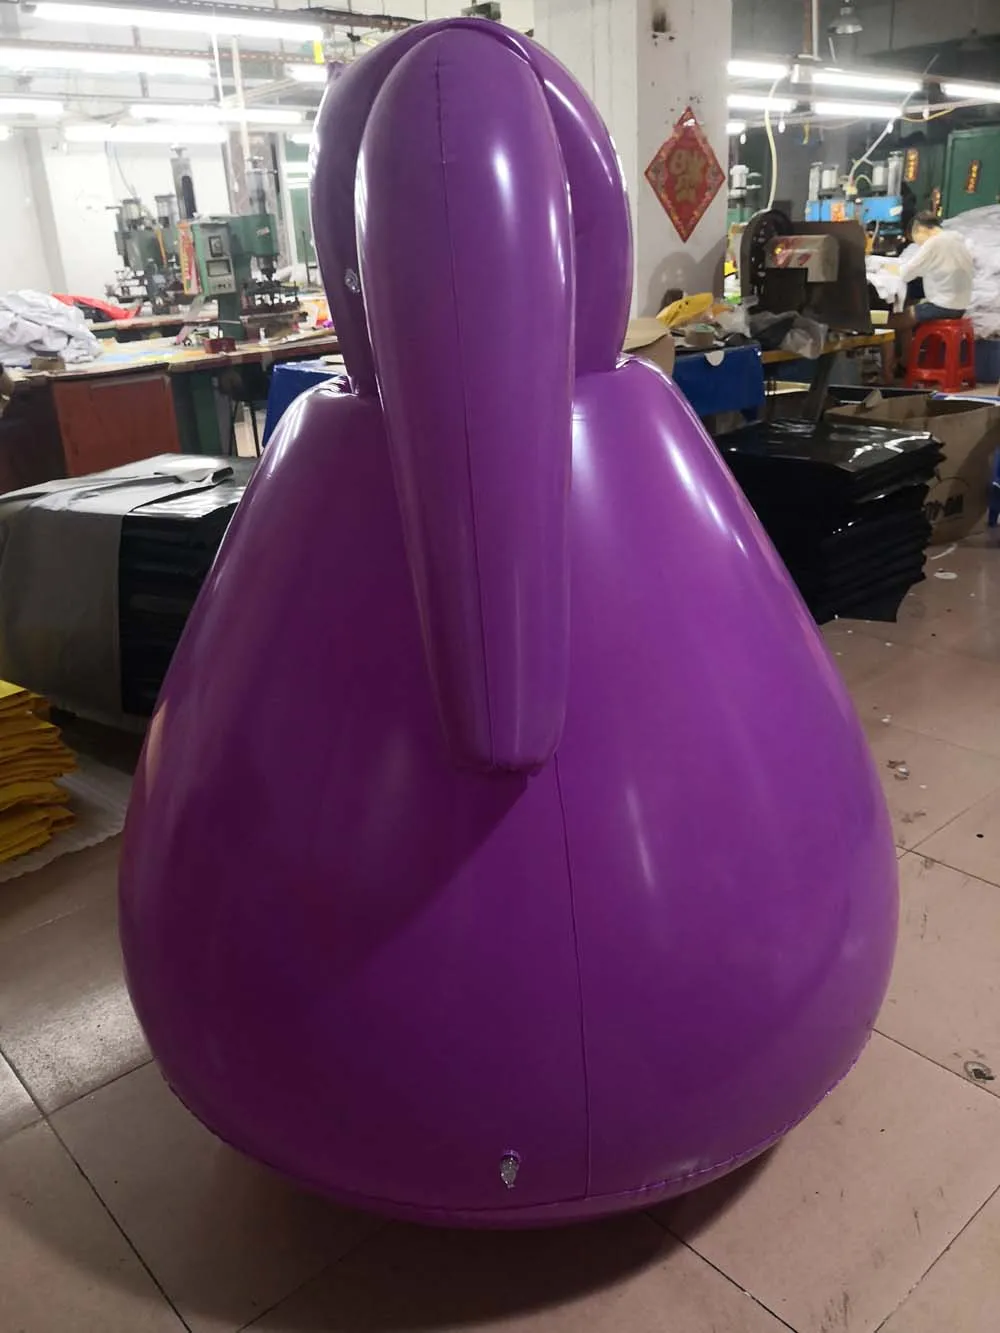 Big PVC round inflatable blueberry ball suit for cosplay. 